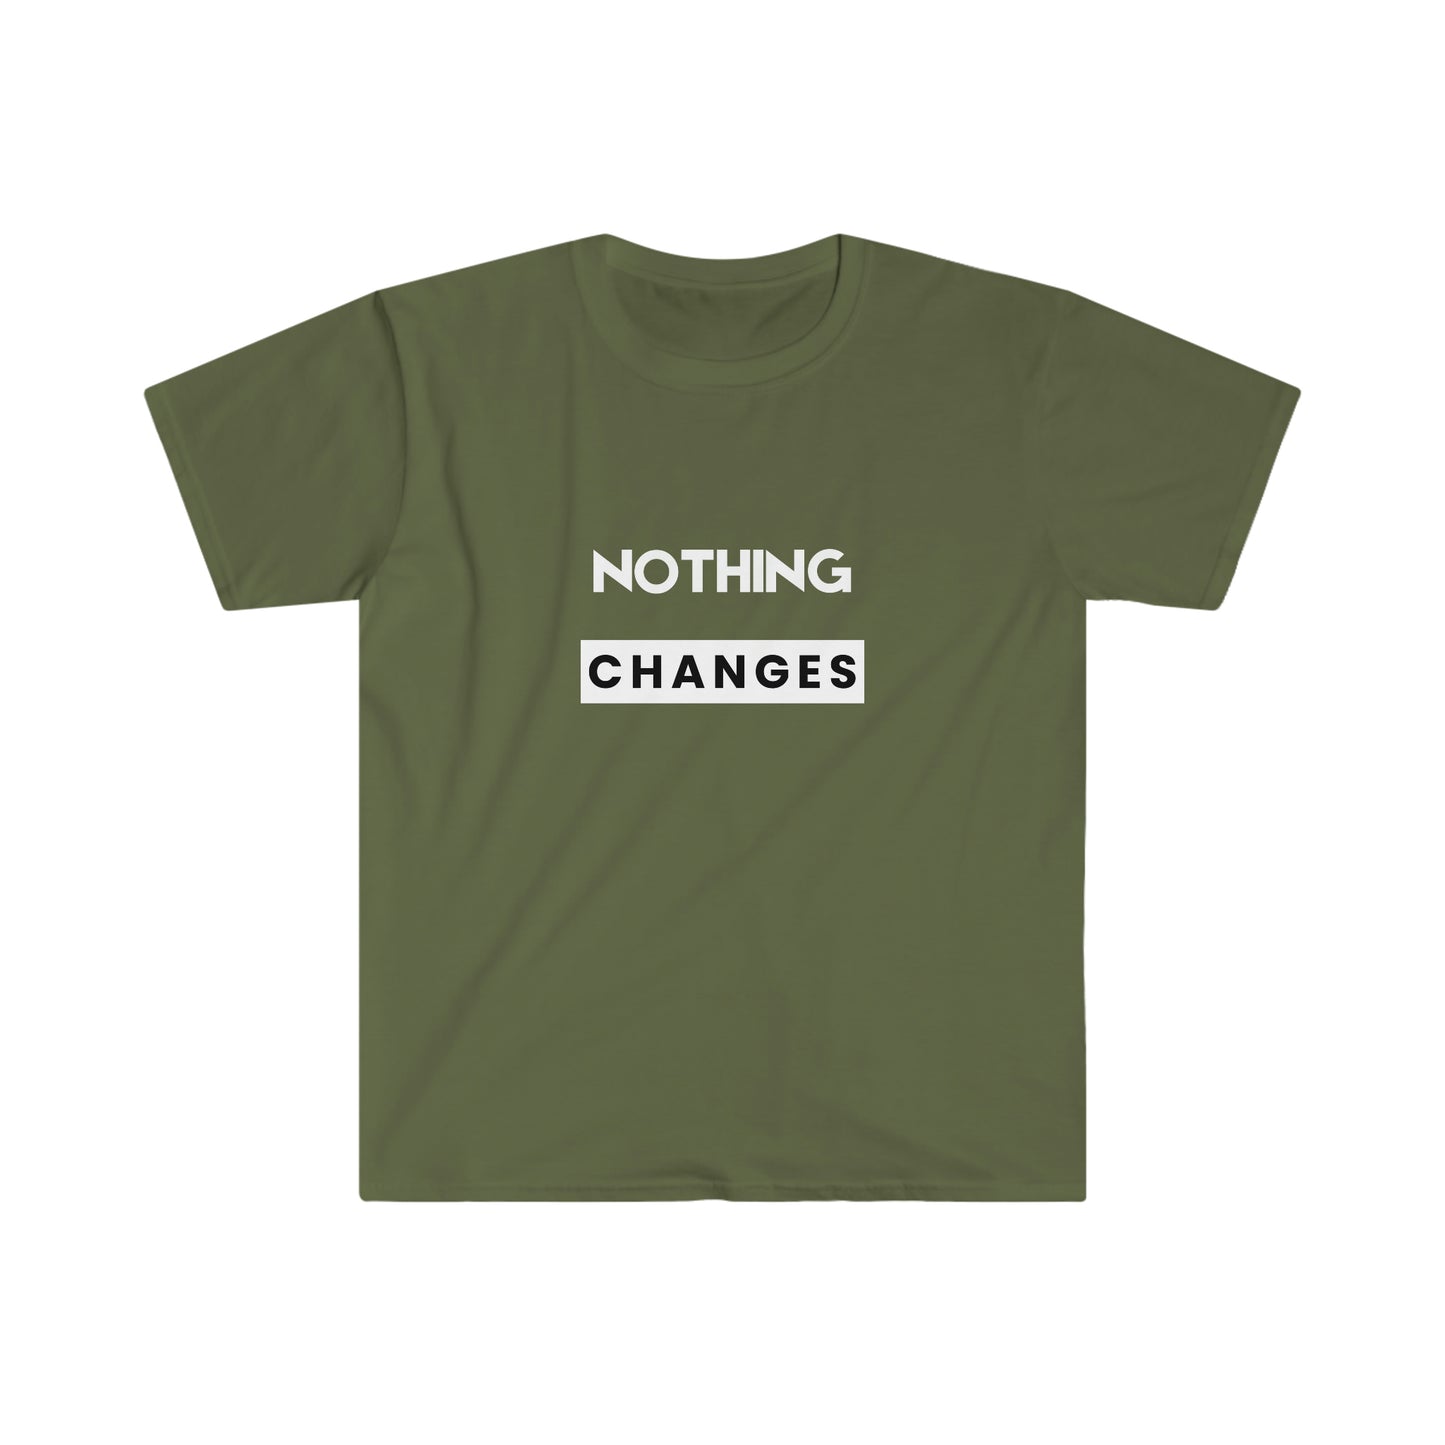 'Nothing Changes Unless You Do' Essential Comfort Tee